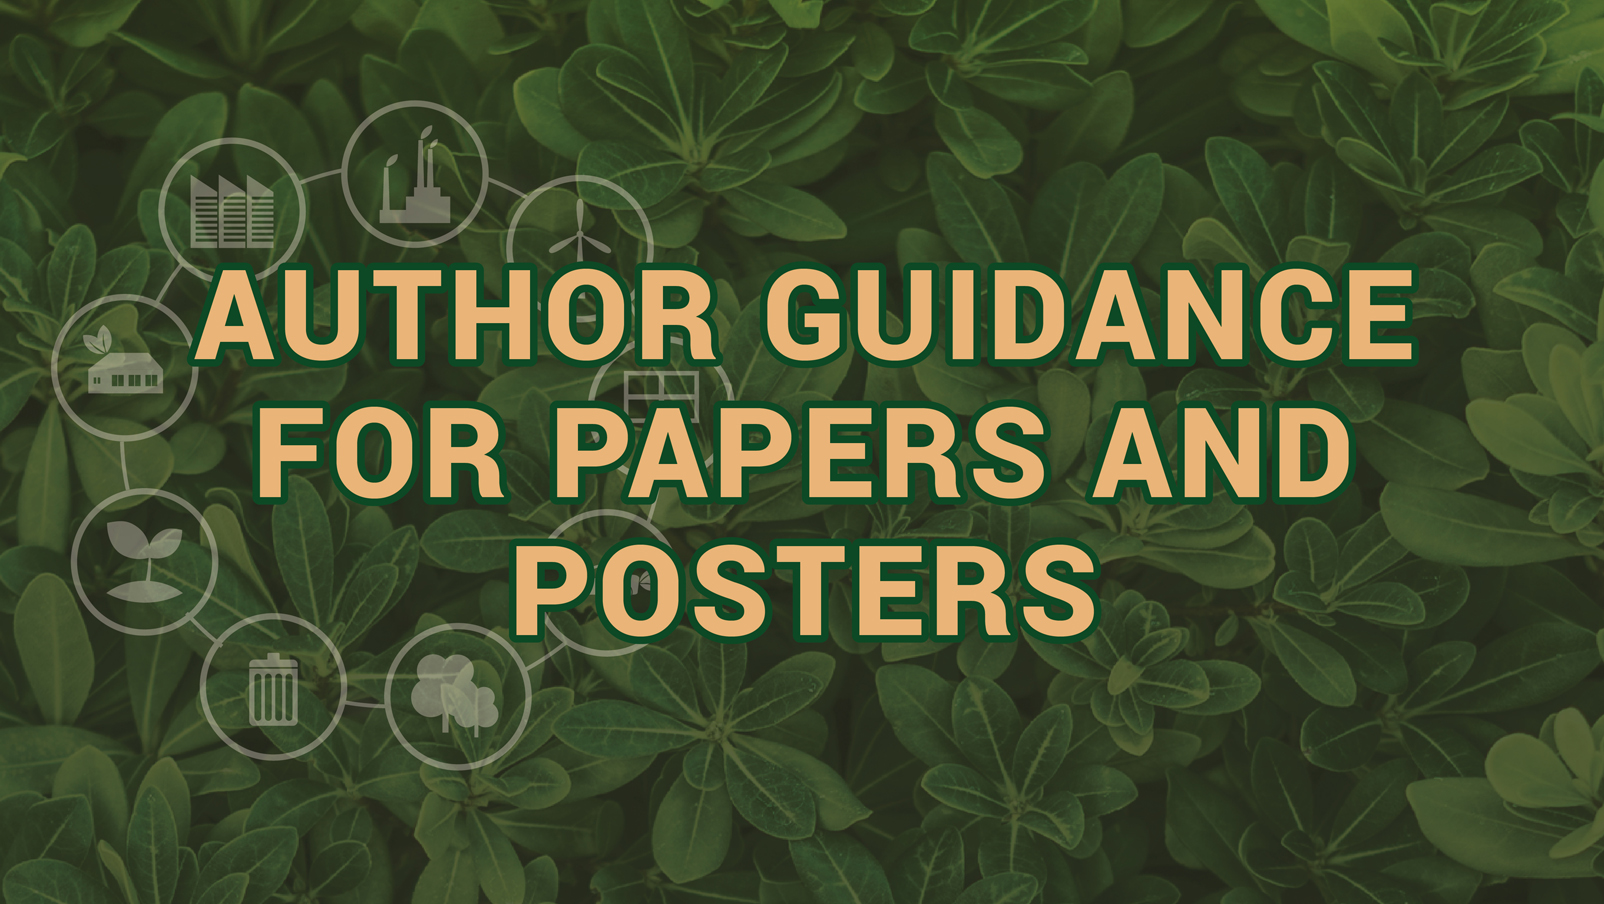 Author guidance for papers and posters